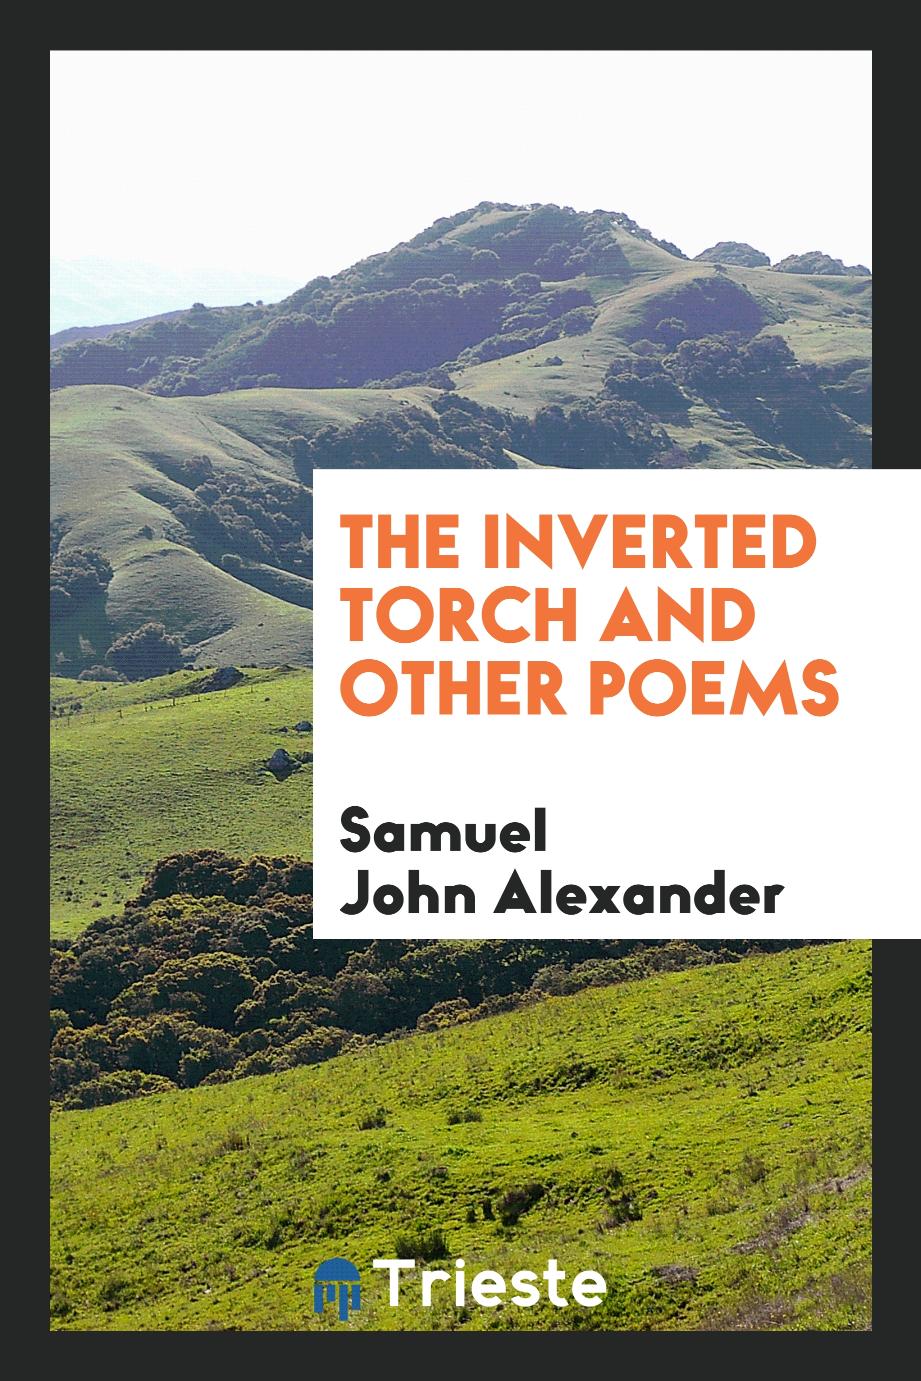 The inverted torch and other poems